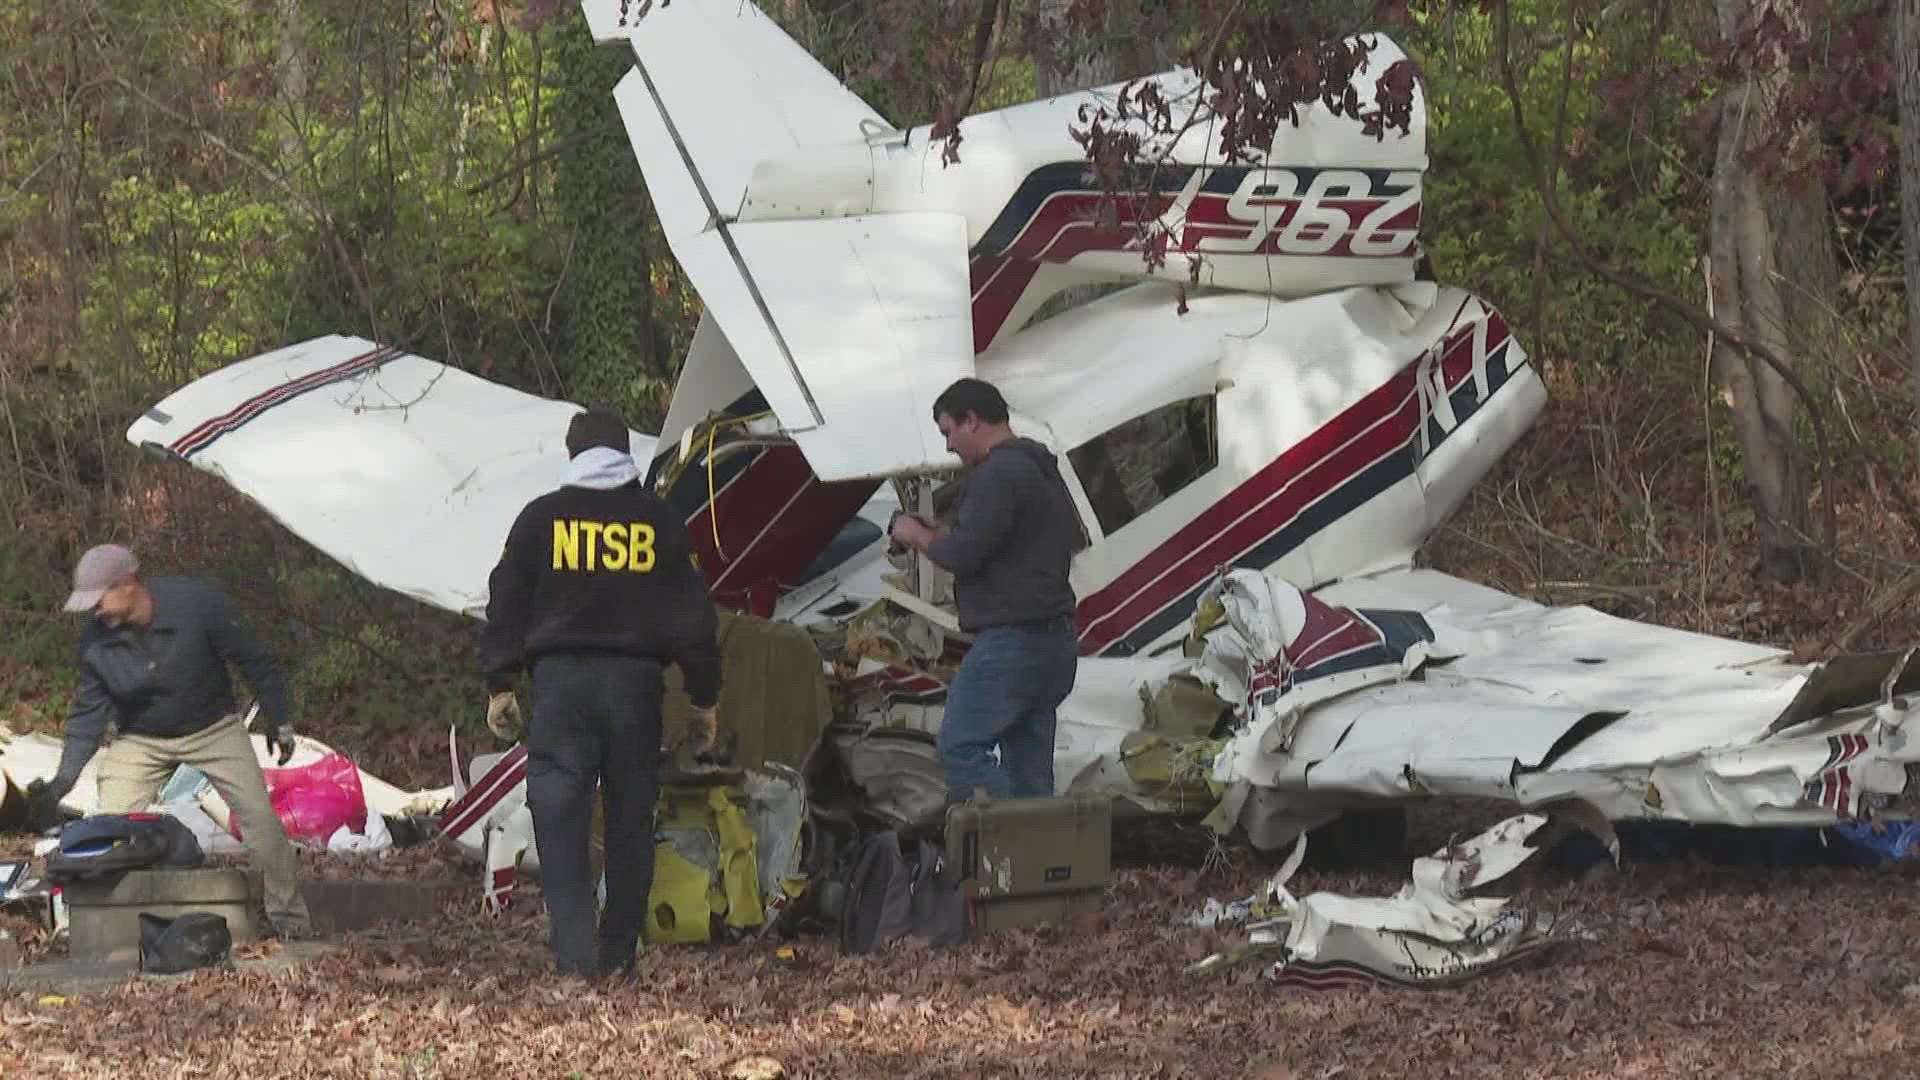 Residents in Freeburg are coping with their loss. The NTSB continues to investigate Monday.